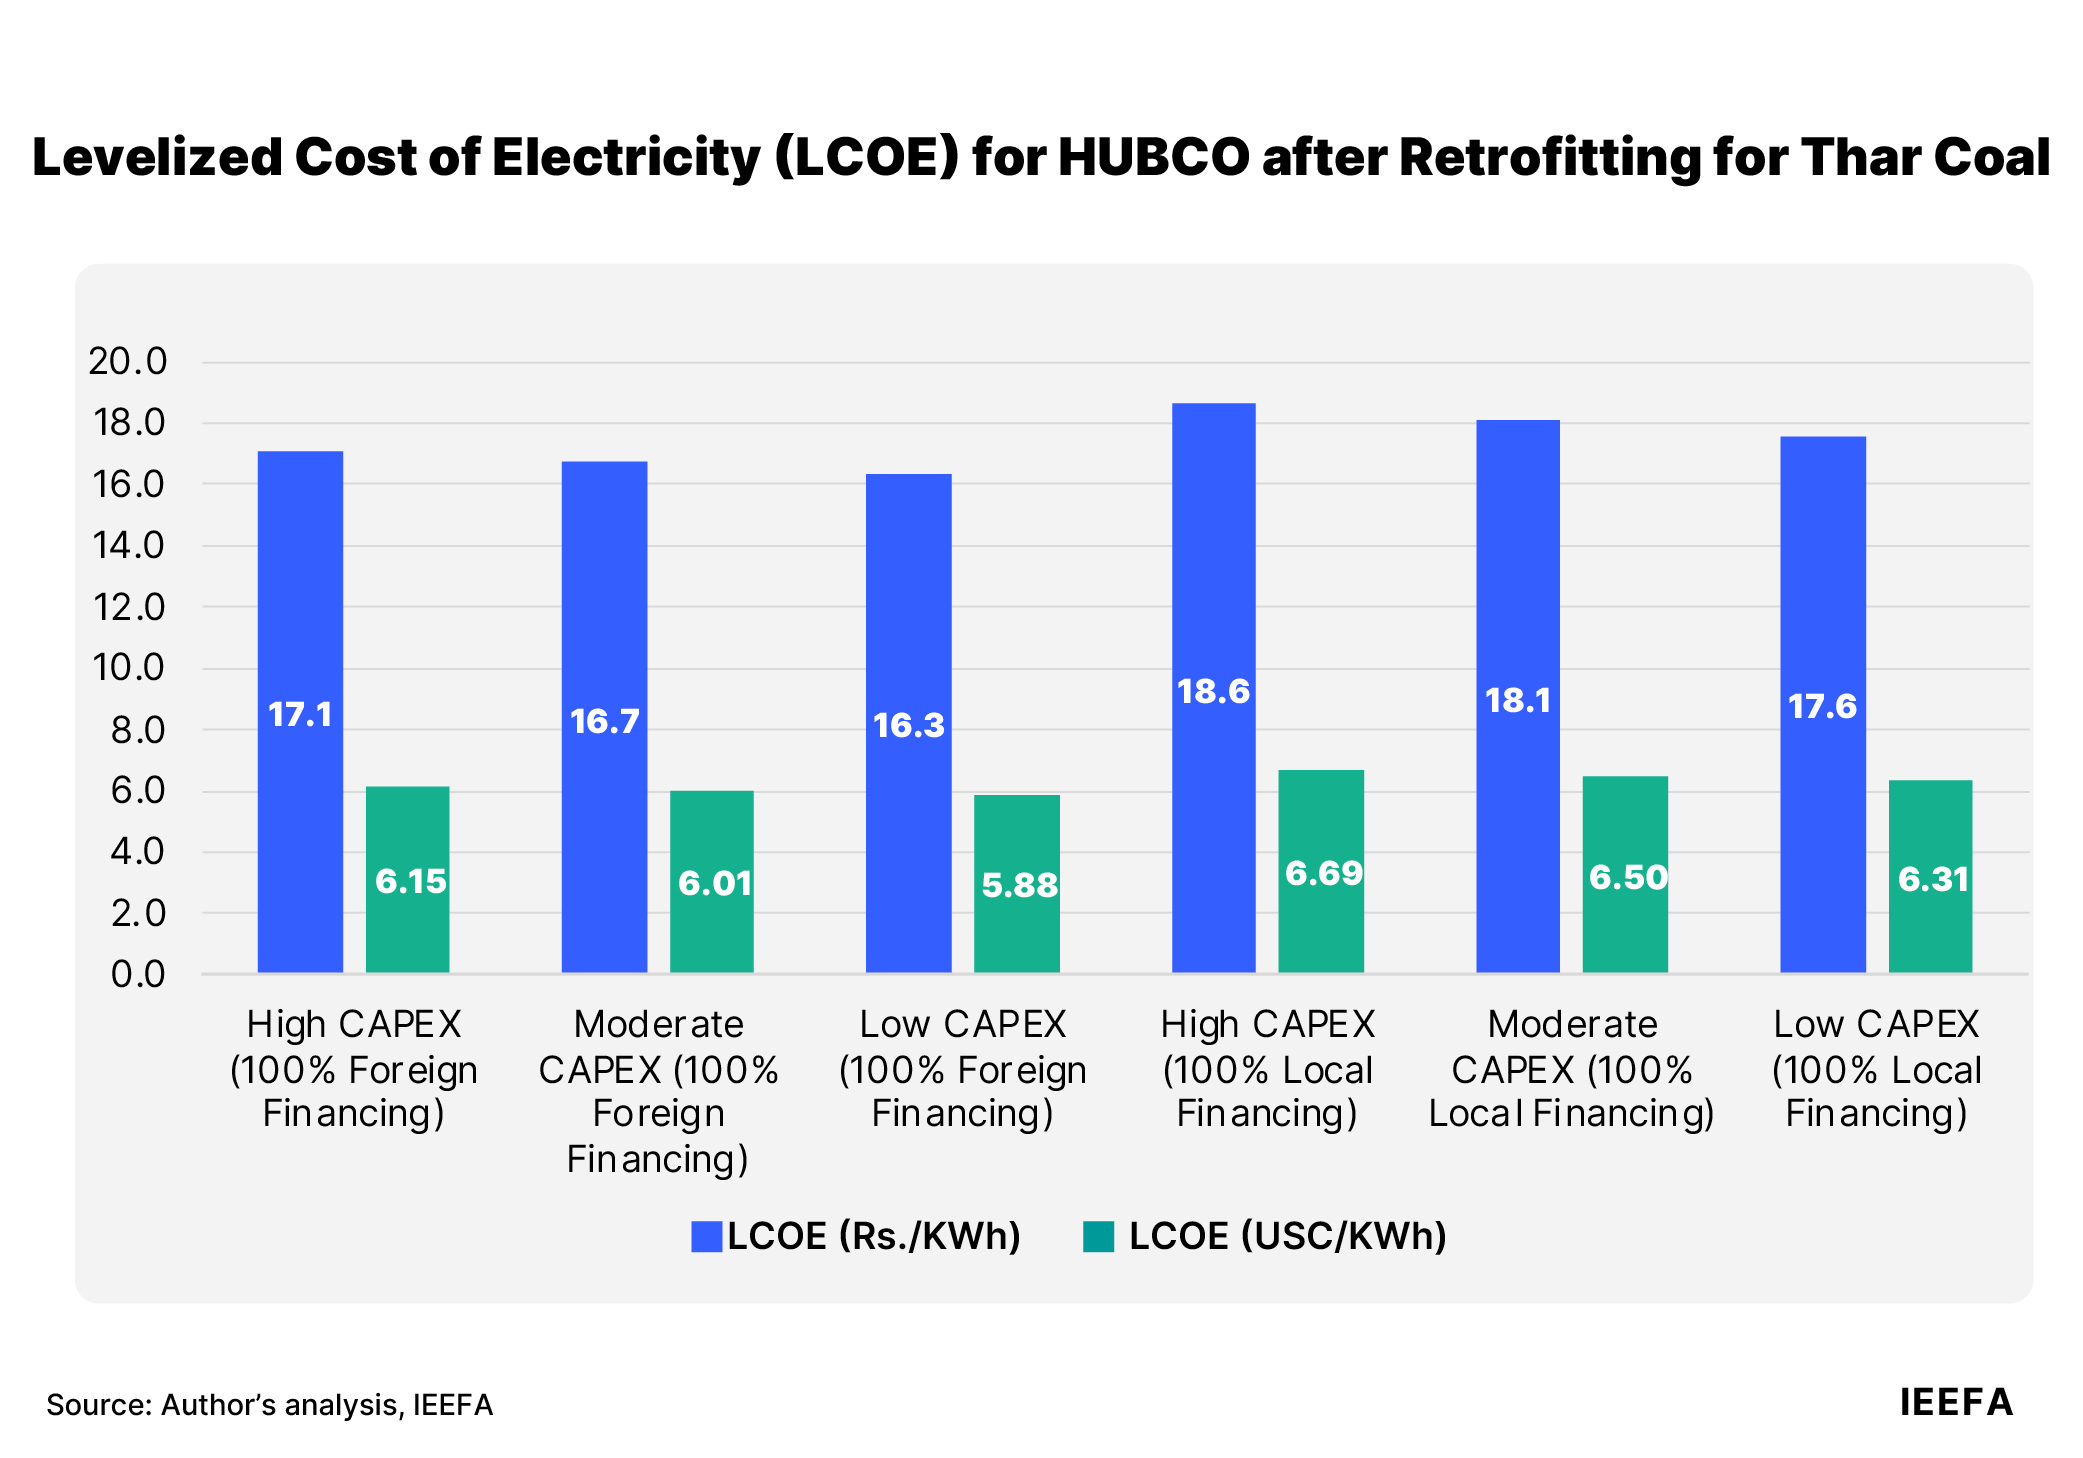 LCOE for HUBCO after retrofitting for Thar coal